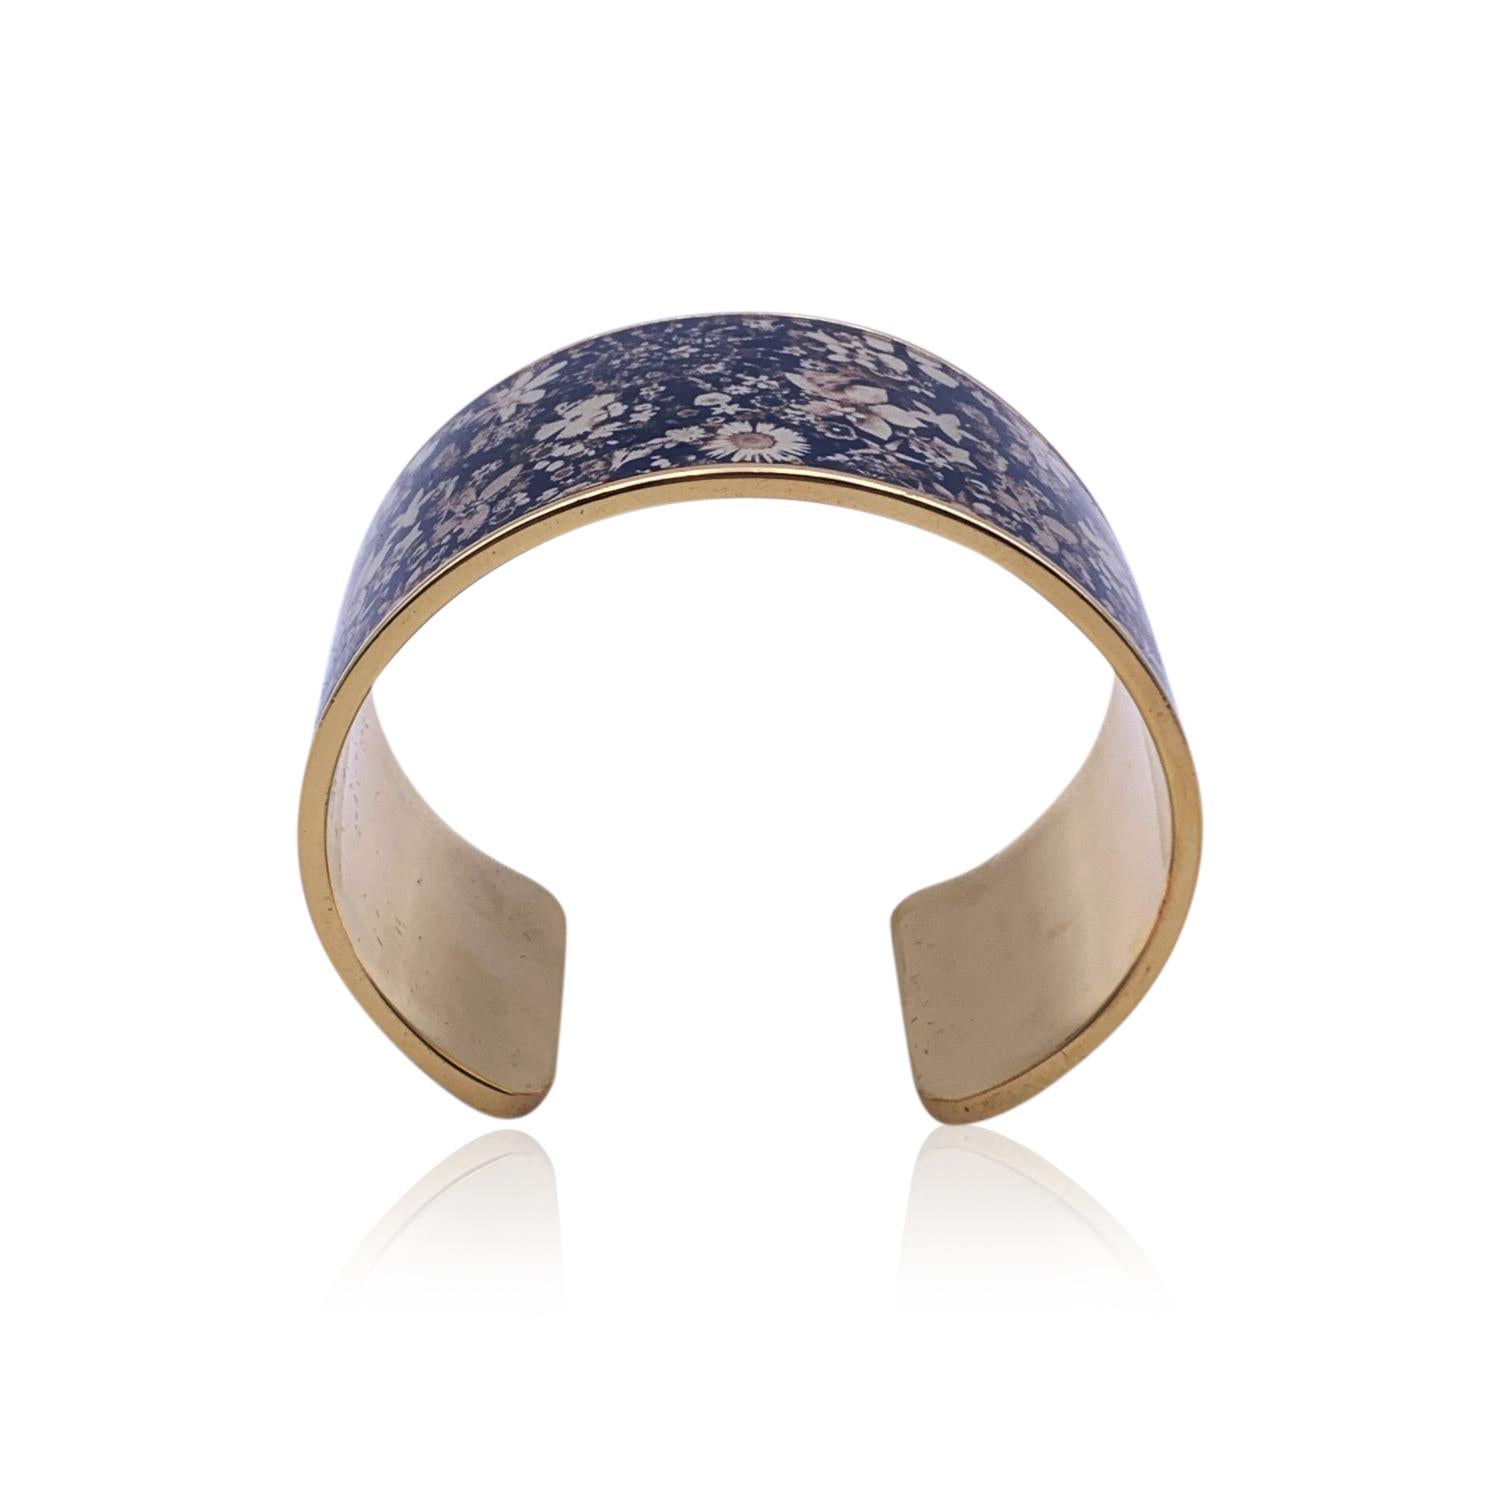 Beautiful cuff bracelet by Christian Lacroix, from the 'Jardin de Songes' Line. Made in gold-tone metal with a floral lacquer top. Will fit up to approx. 7 inches - 17.8 cm wrist. Max width/ Inner diameter: 2.5 inches - 6.4 cm. Width: 3.4 cm.